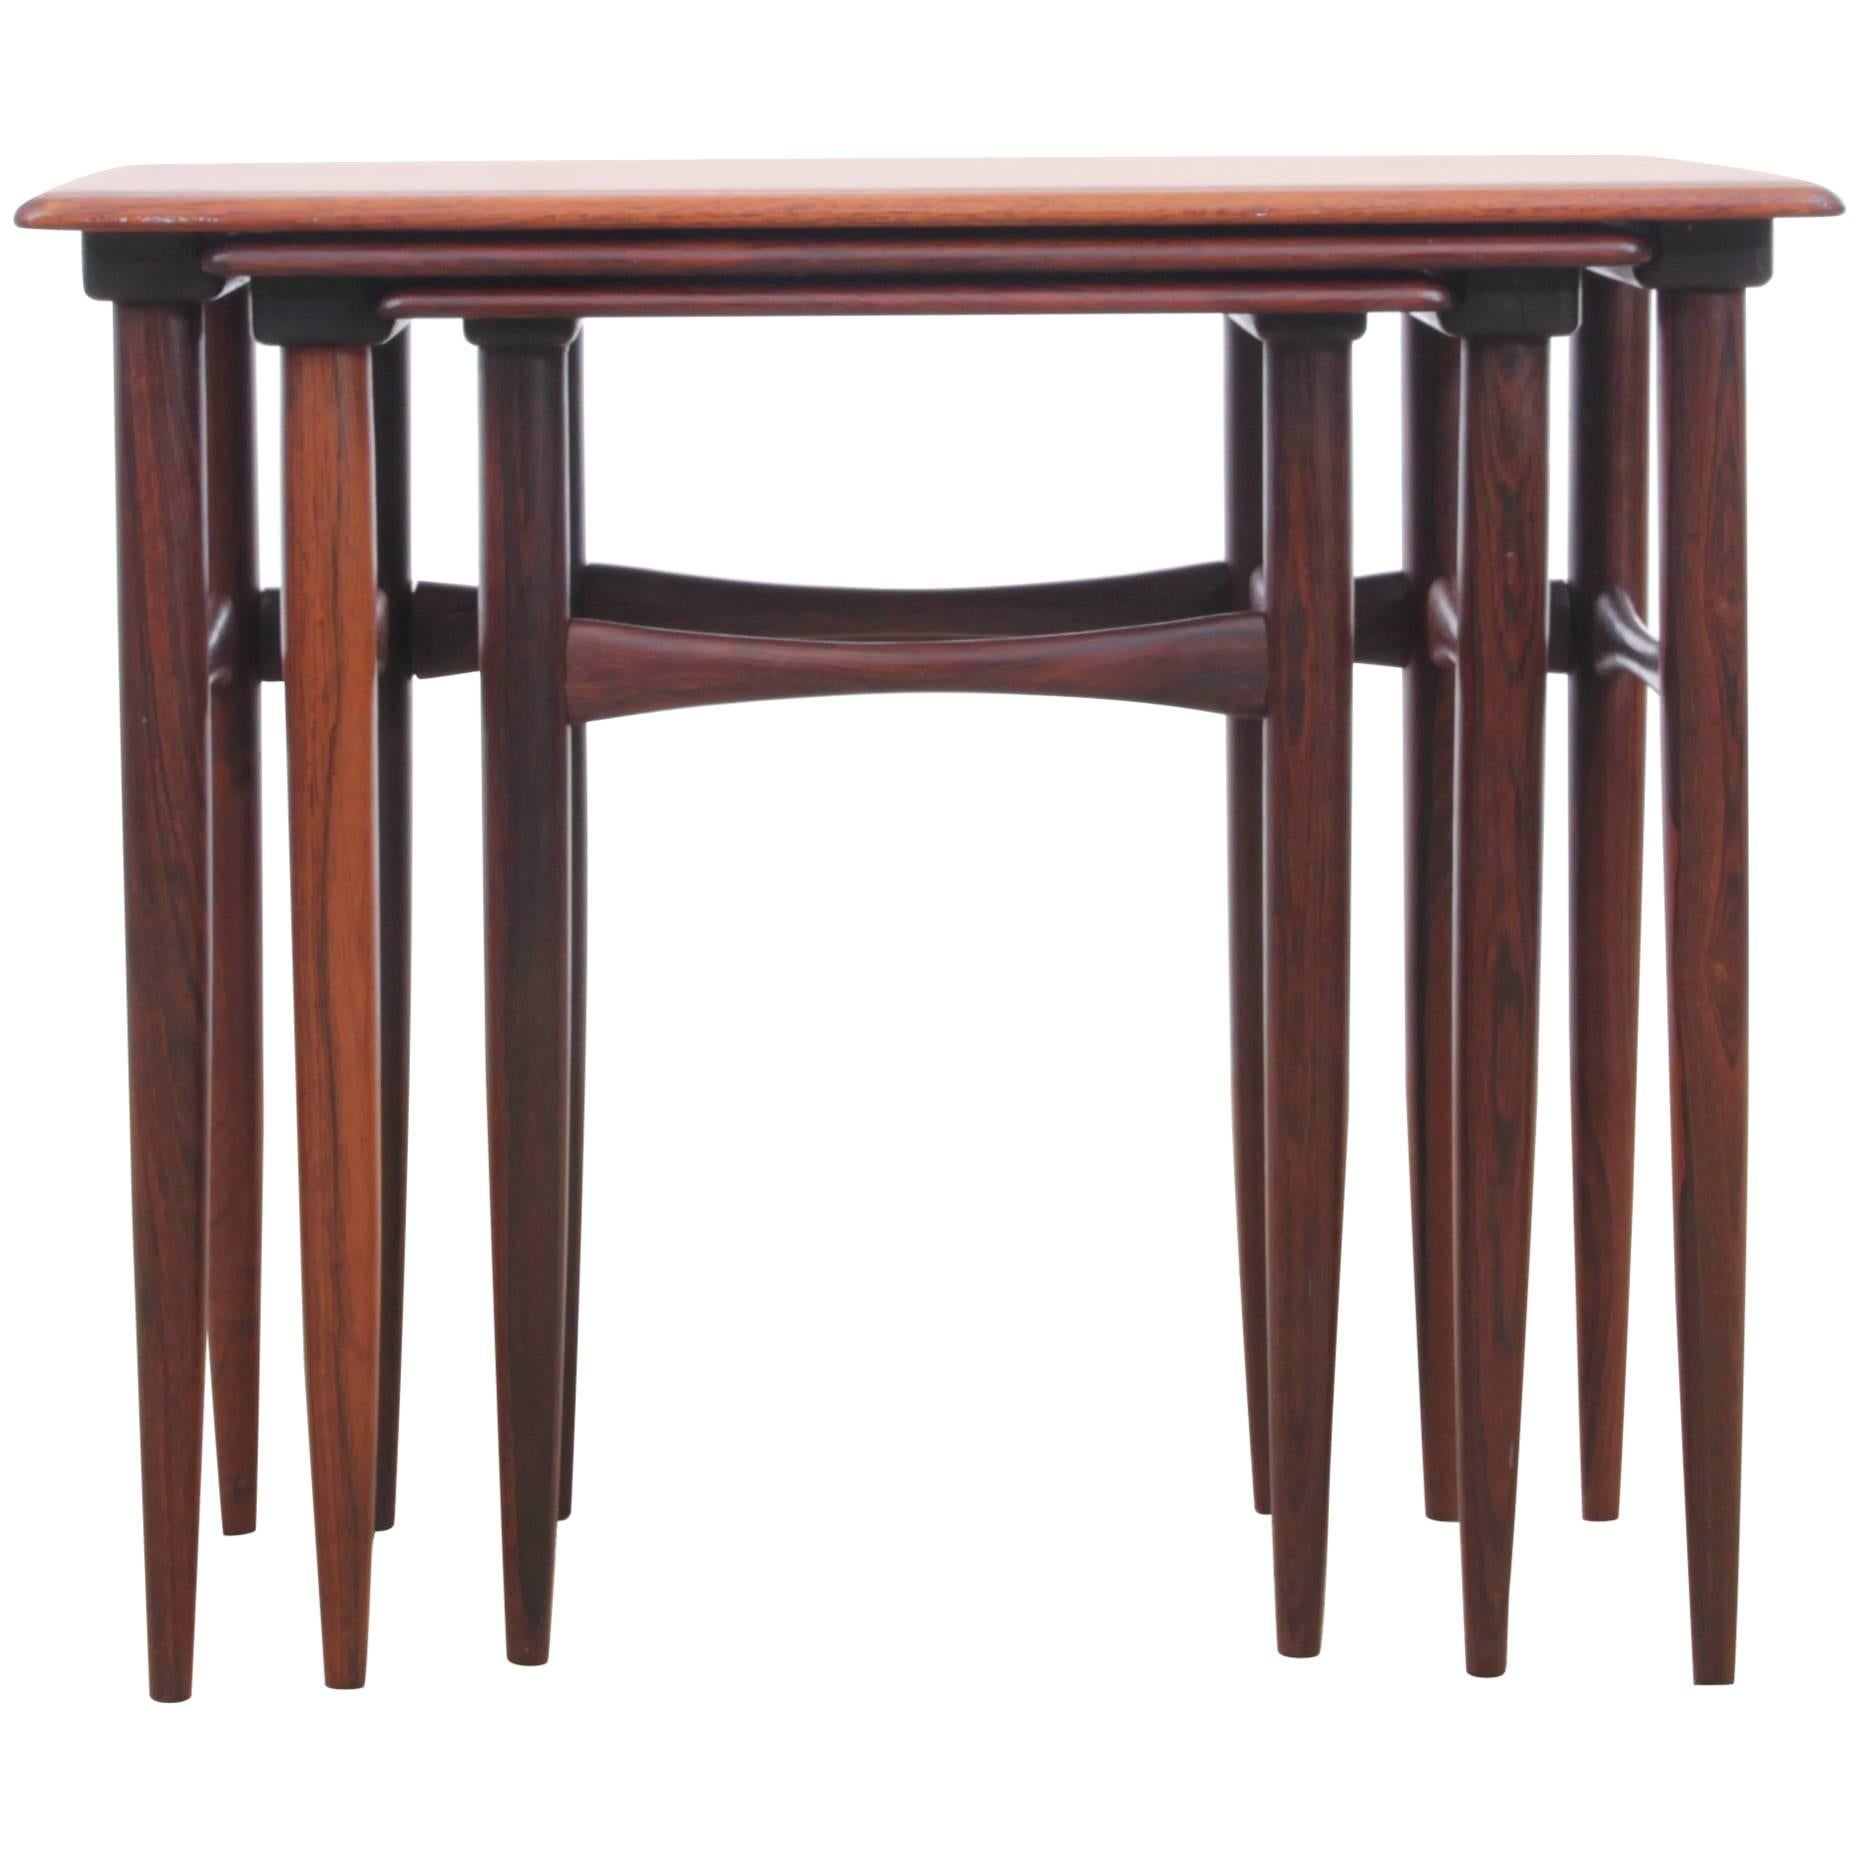 Mid-Century Modern Scandinavian Nesting Tables in Rosewood by Poul Hundevad